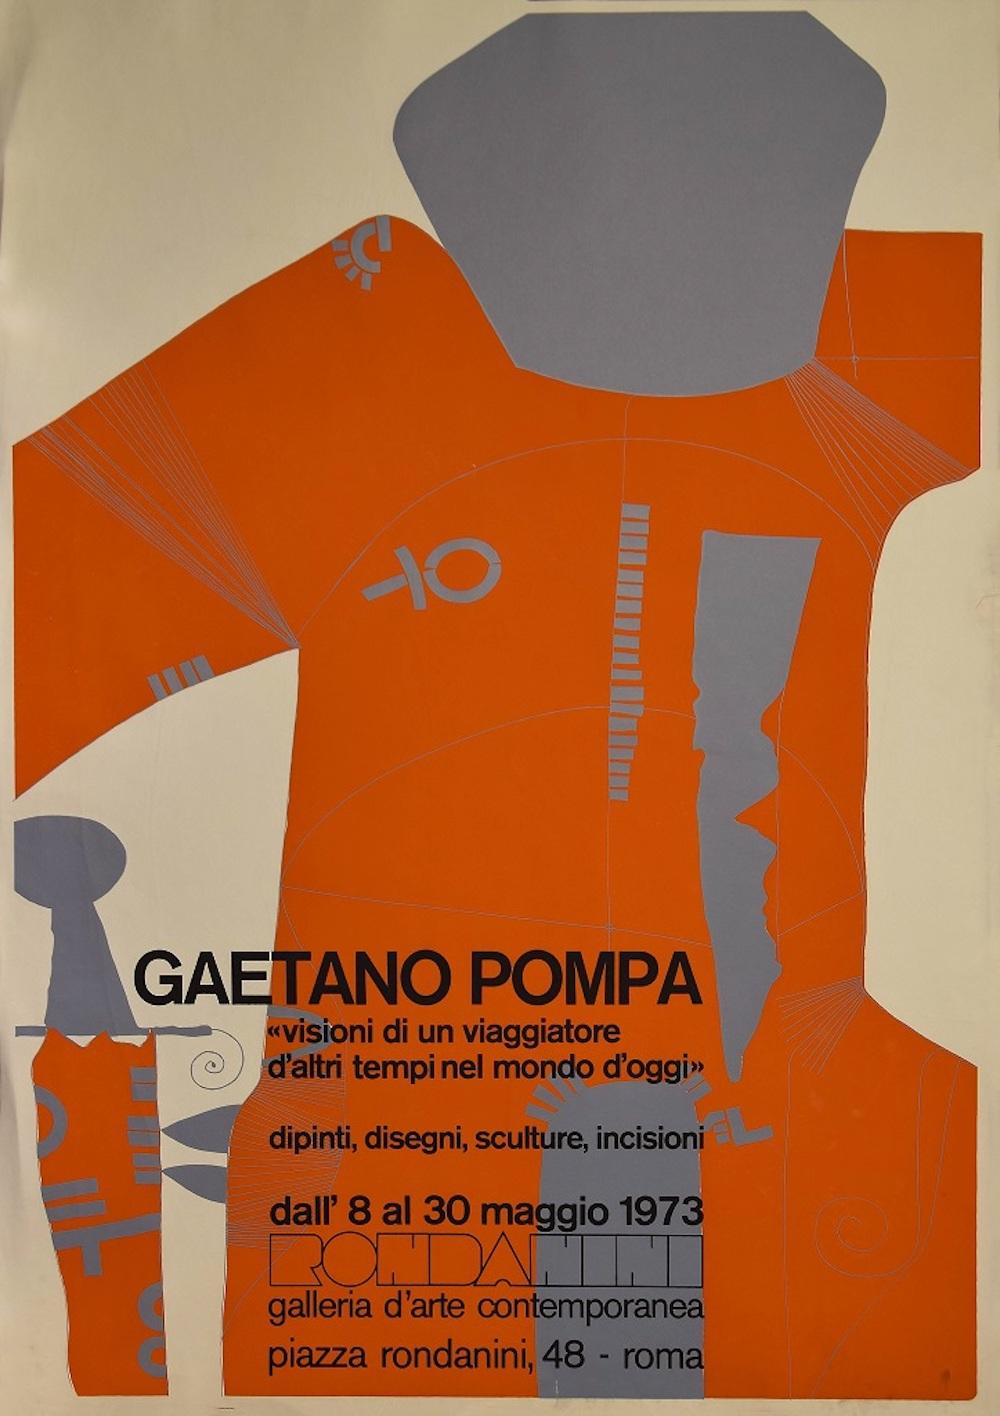 Gaetano Pompa Figurative Print - Visions of an Old-time Traveller in the Present Day World - Vintage Poster- 1973